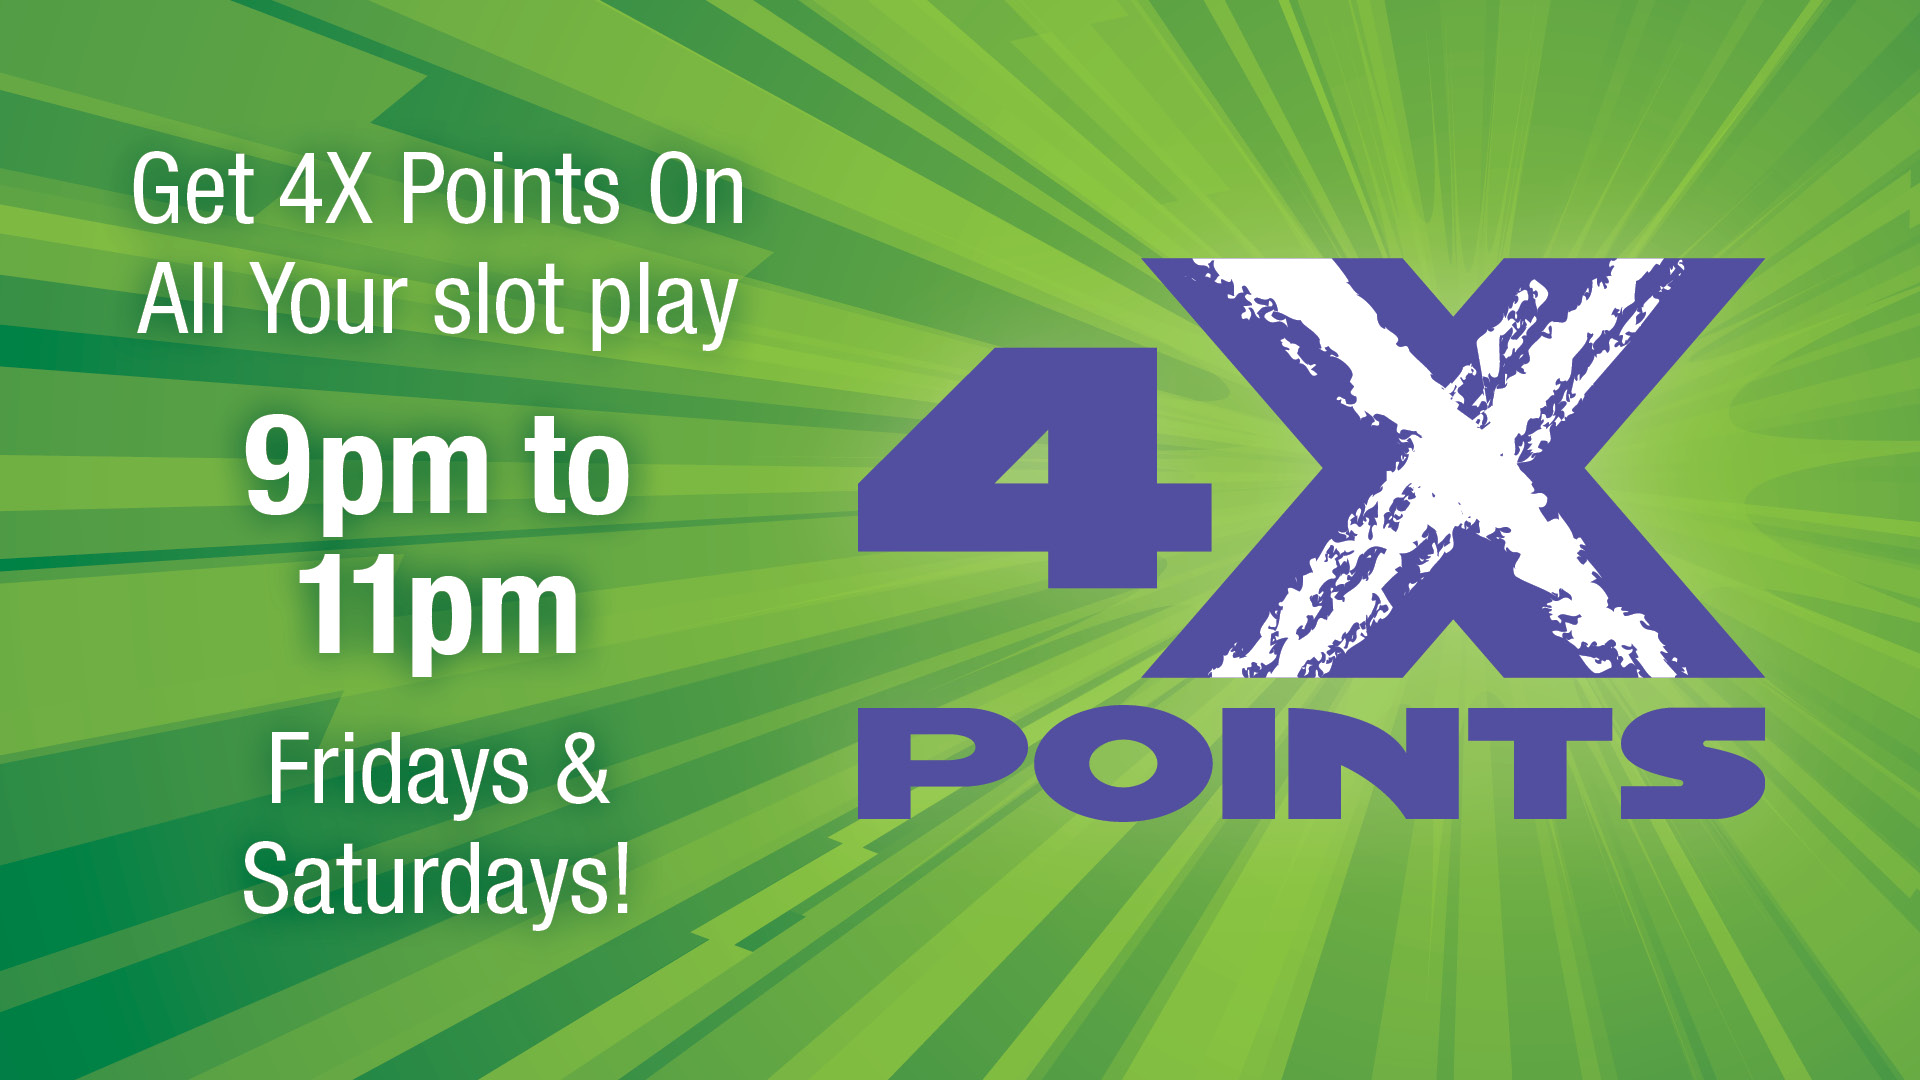 4X Points from 9pm to 11pm Fridays & Saturdays starting March 22